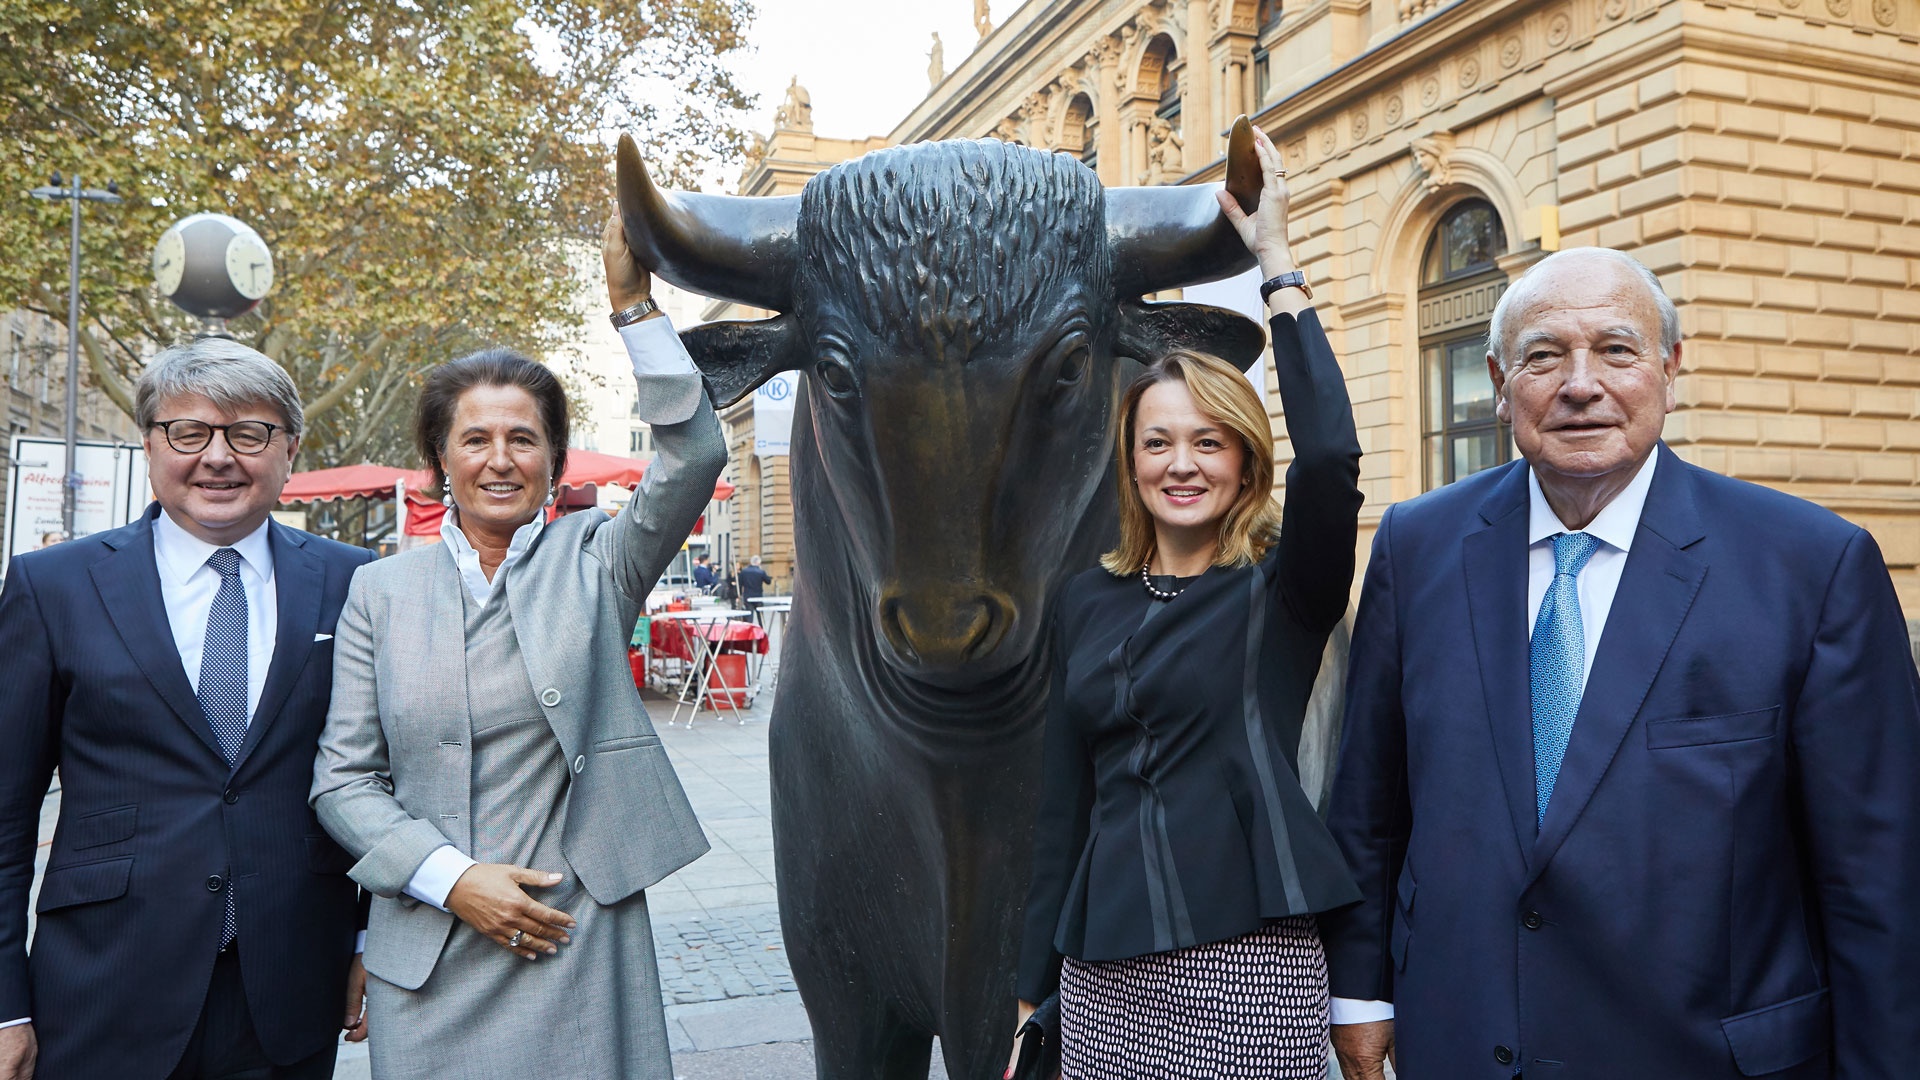 Deutsche Börse CEO Theodor Weimer and his wife Silke Weimer together with Heinz Hermann Thiele and his wife Nadia Thiele stand next to the legendary bull in front of Frankfurt Stock Exchange.